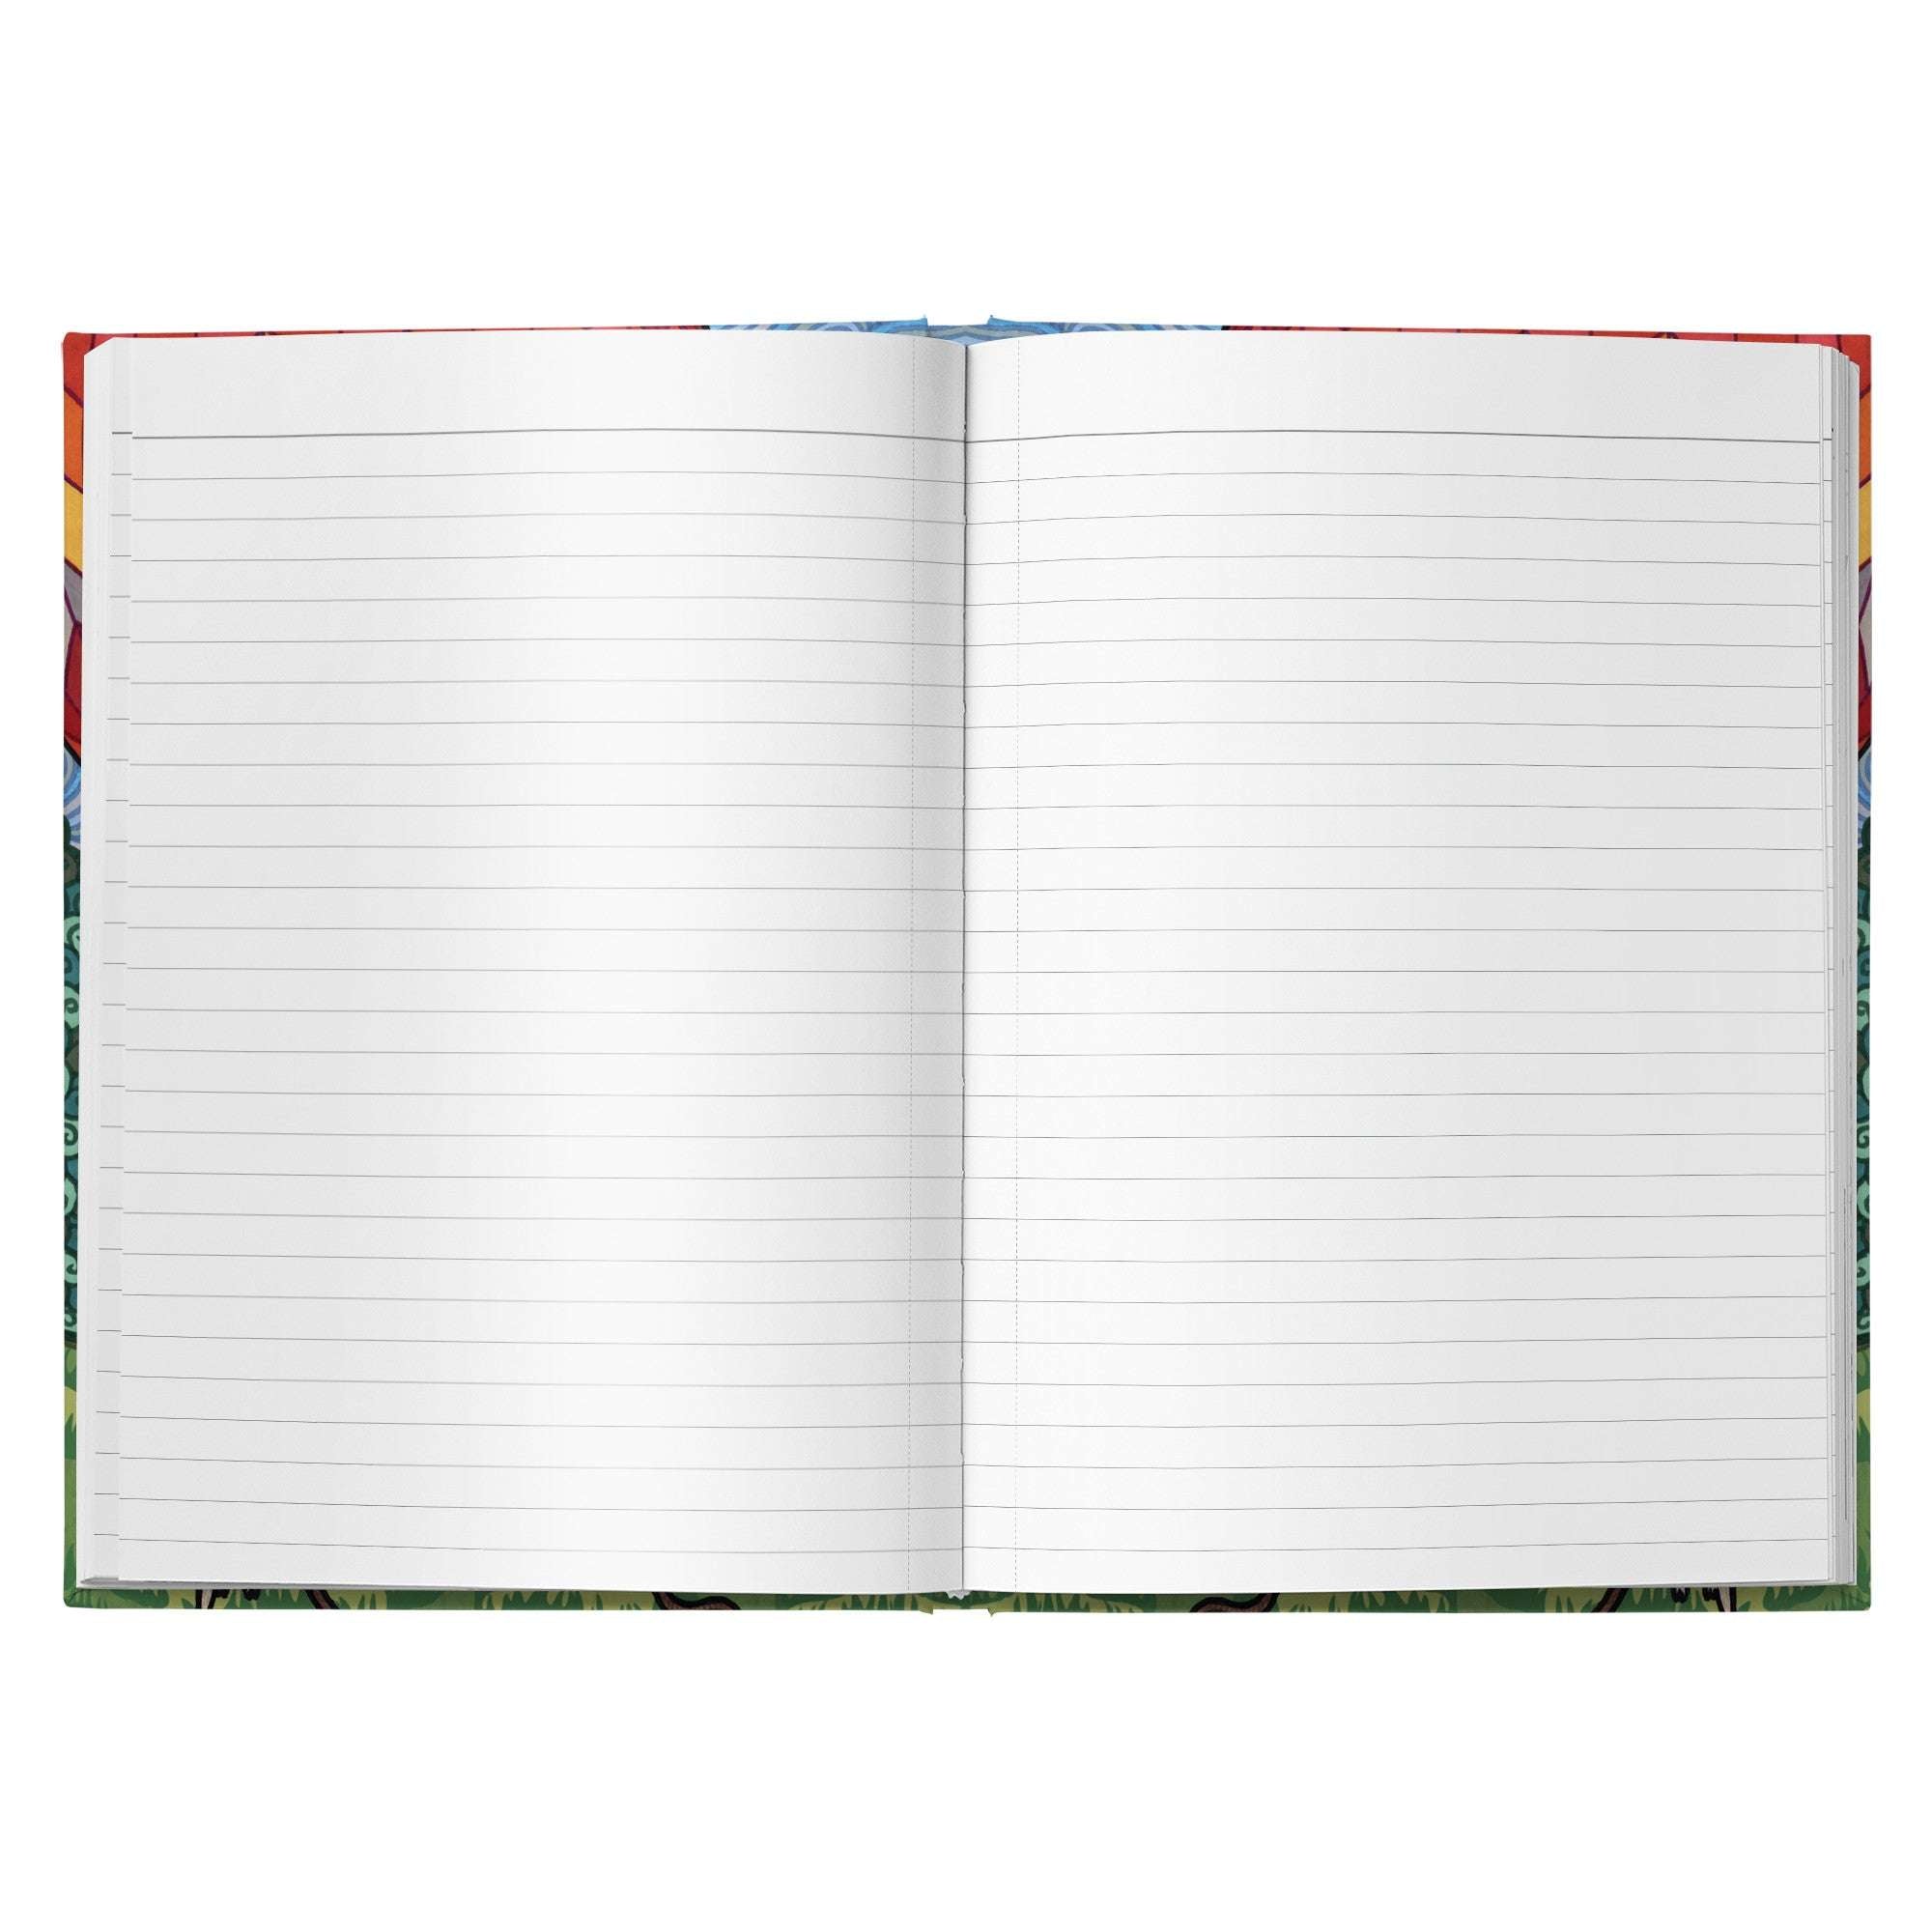 Interior of a Ferret Journal, showing blank lined pages.